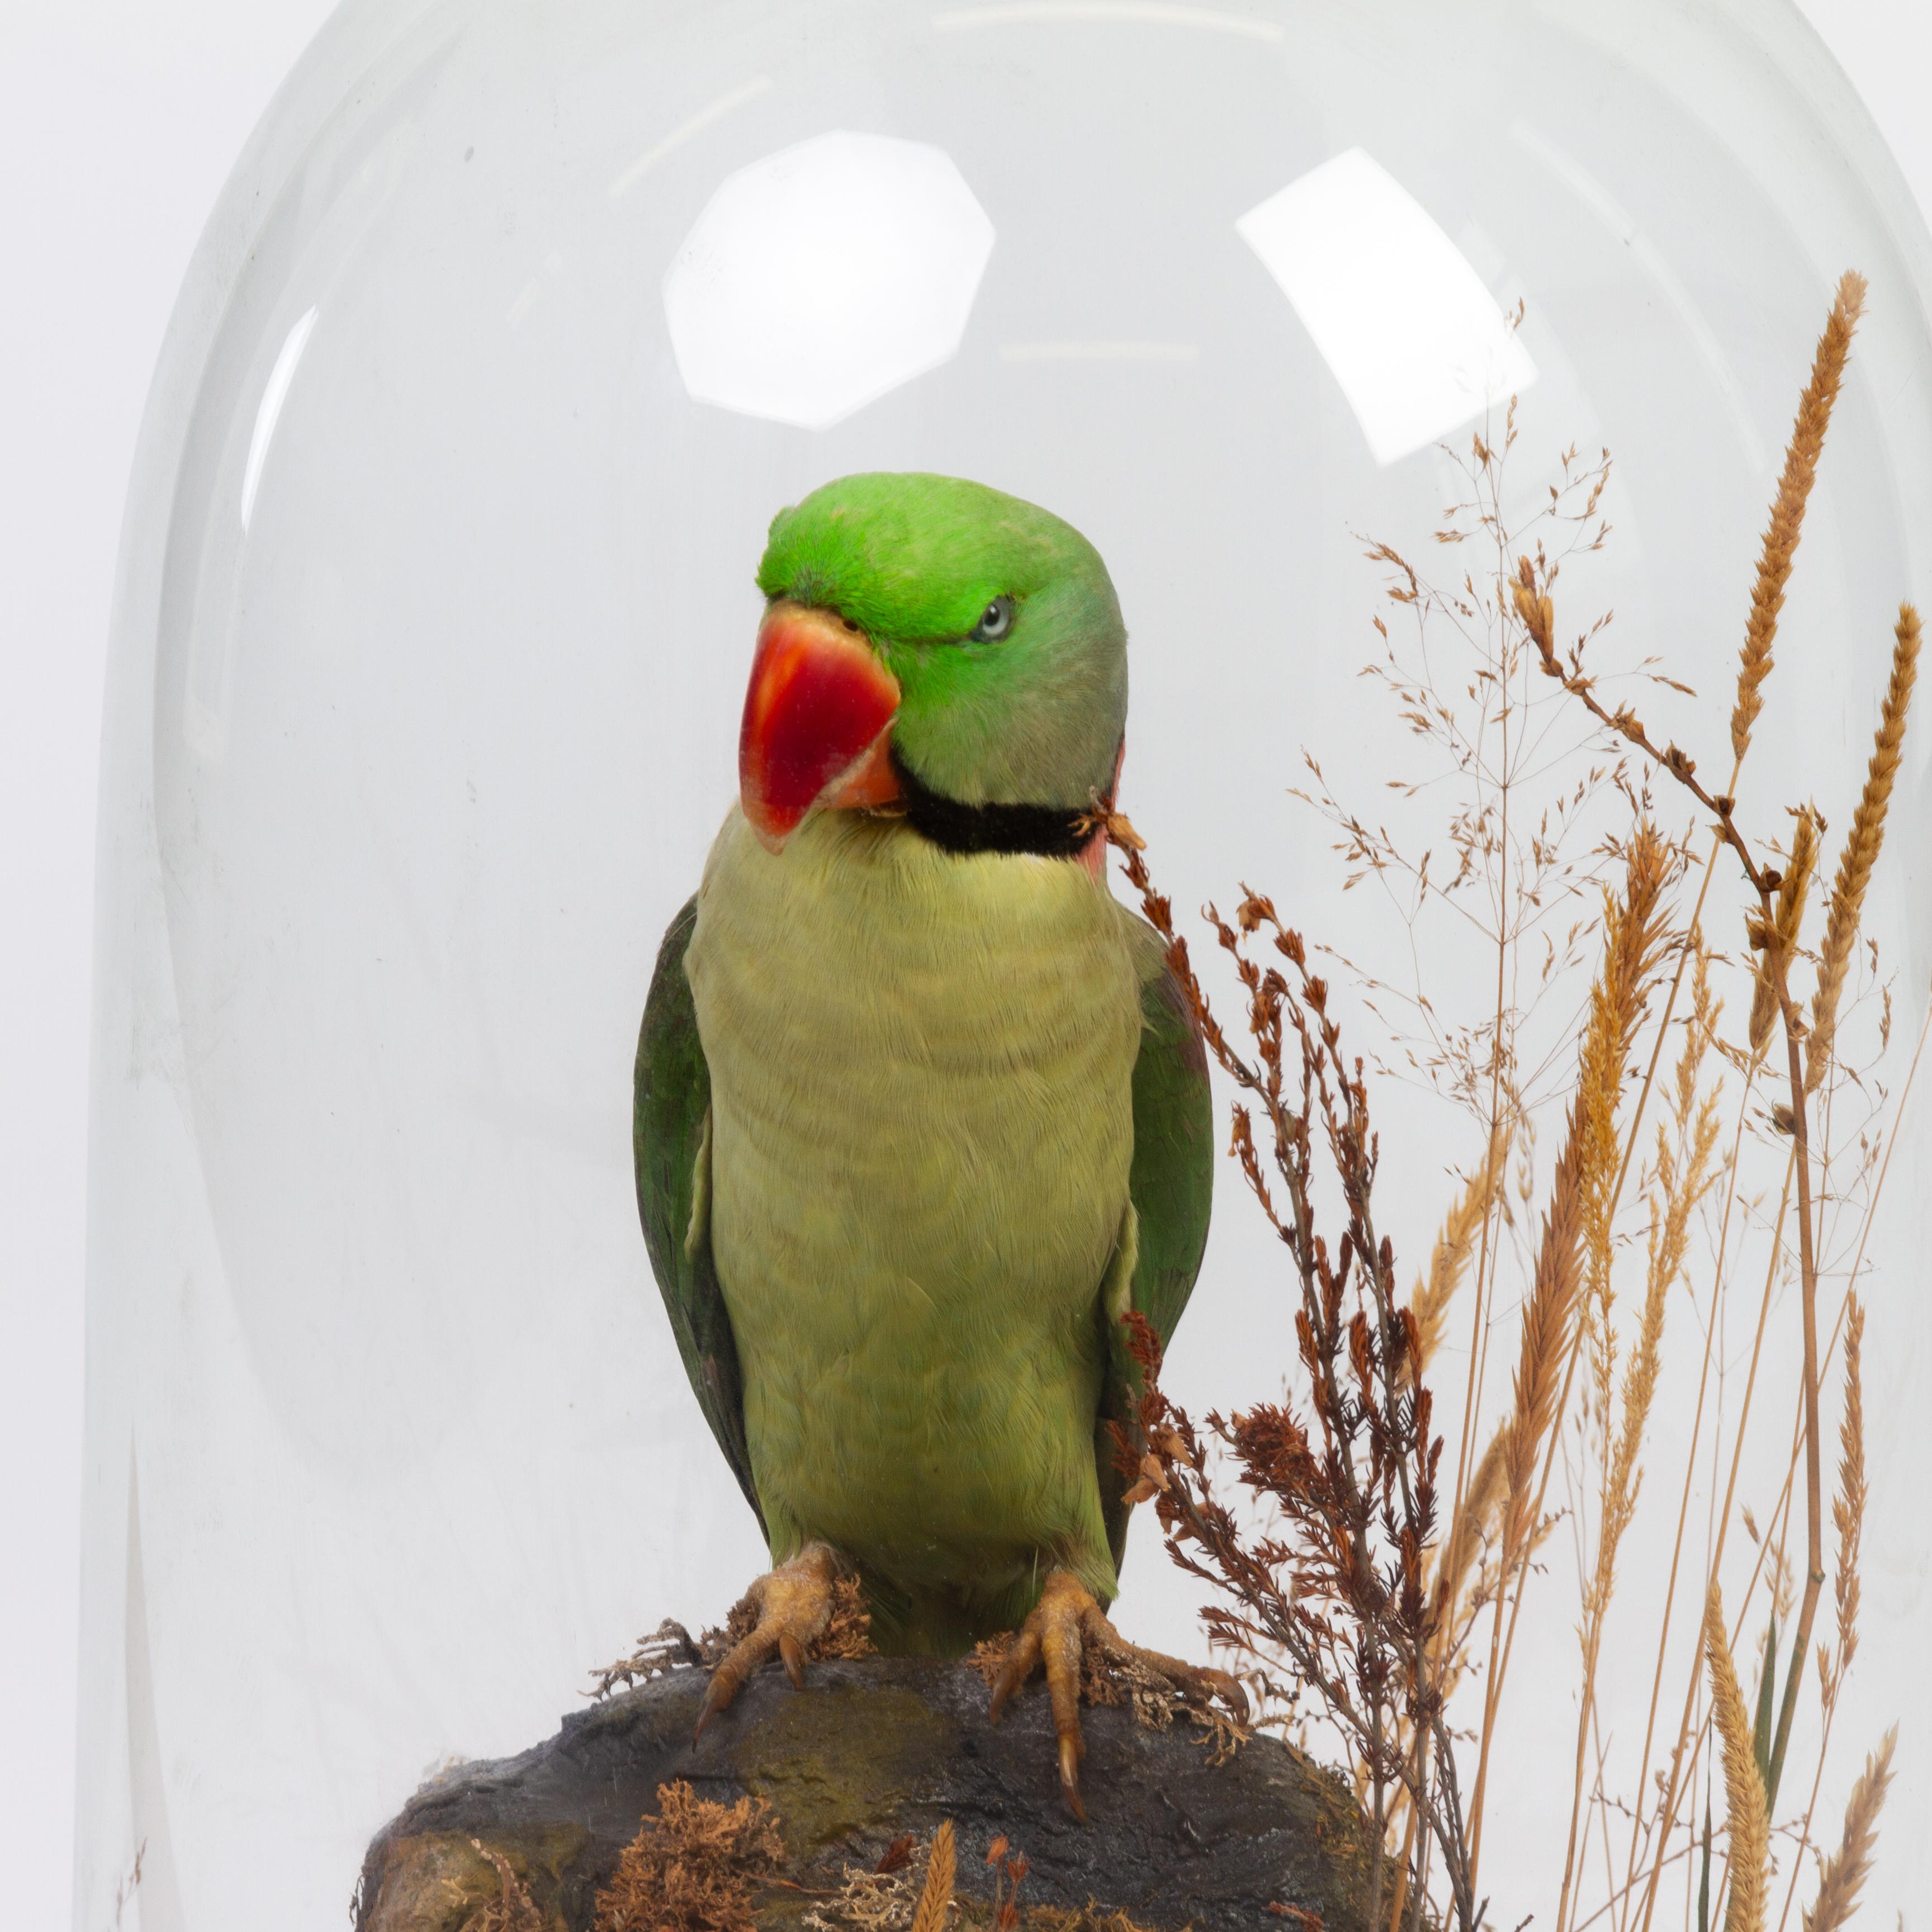 Indian Ring-Necked Victorian Taxidermy Parakeet Parrot Under Dome 19th Century 
Good condition overall, displays remarkably 
From a private collection.
Free international shipping.